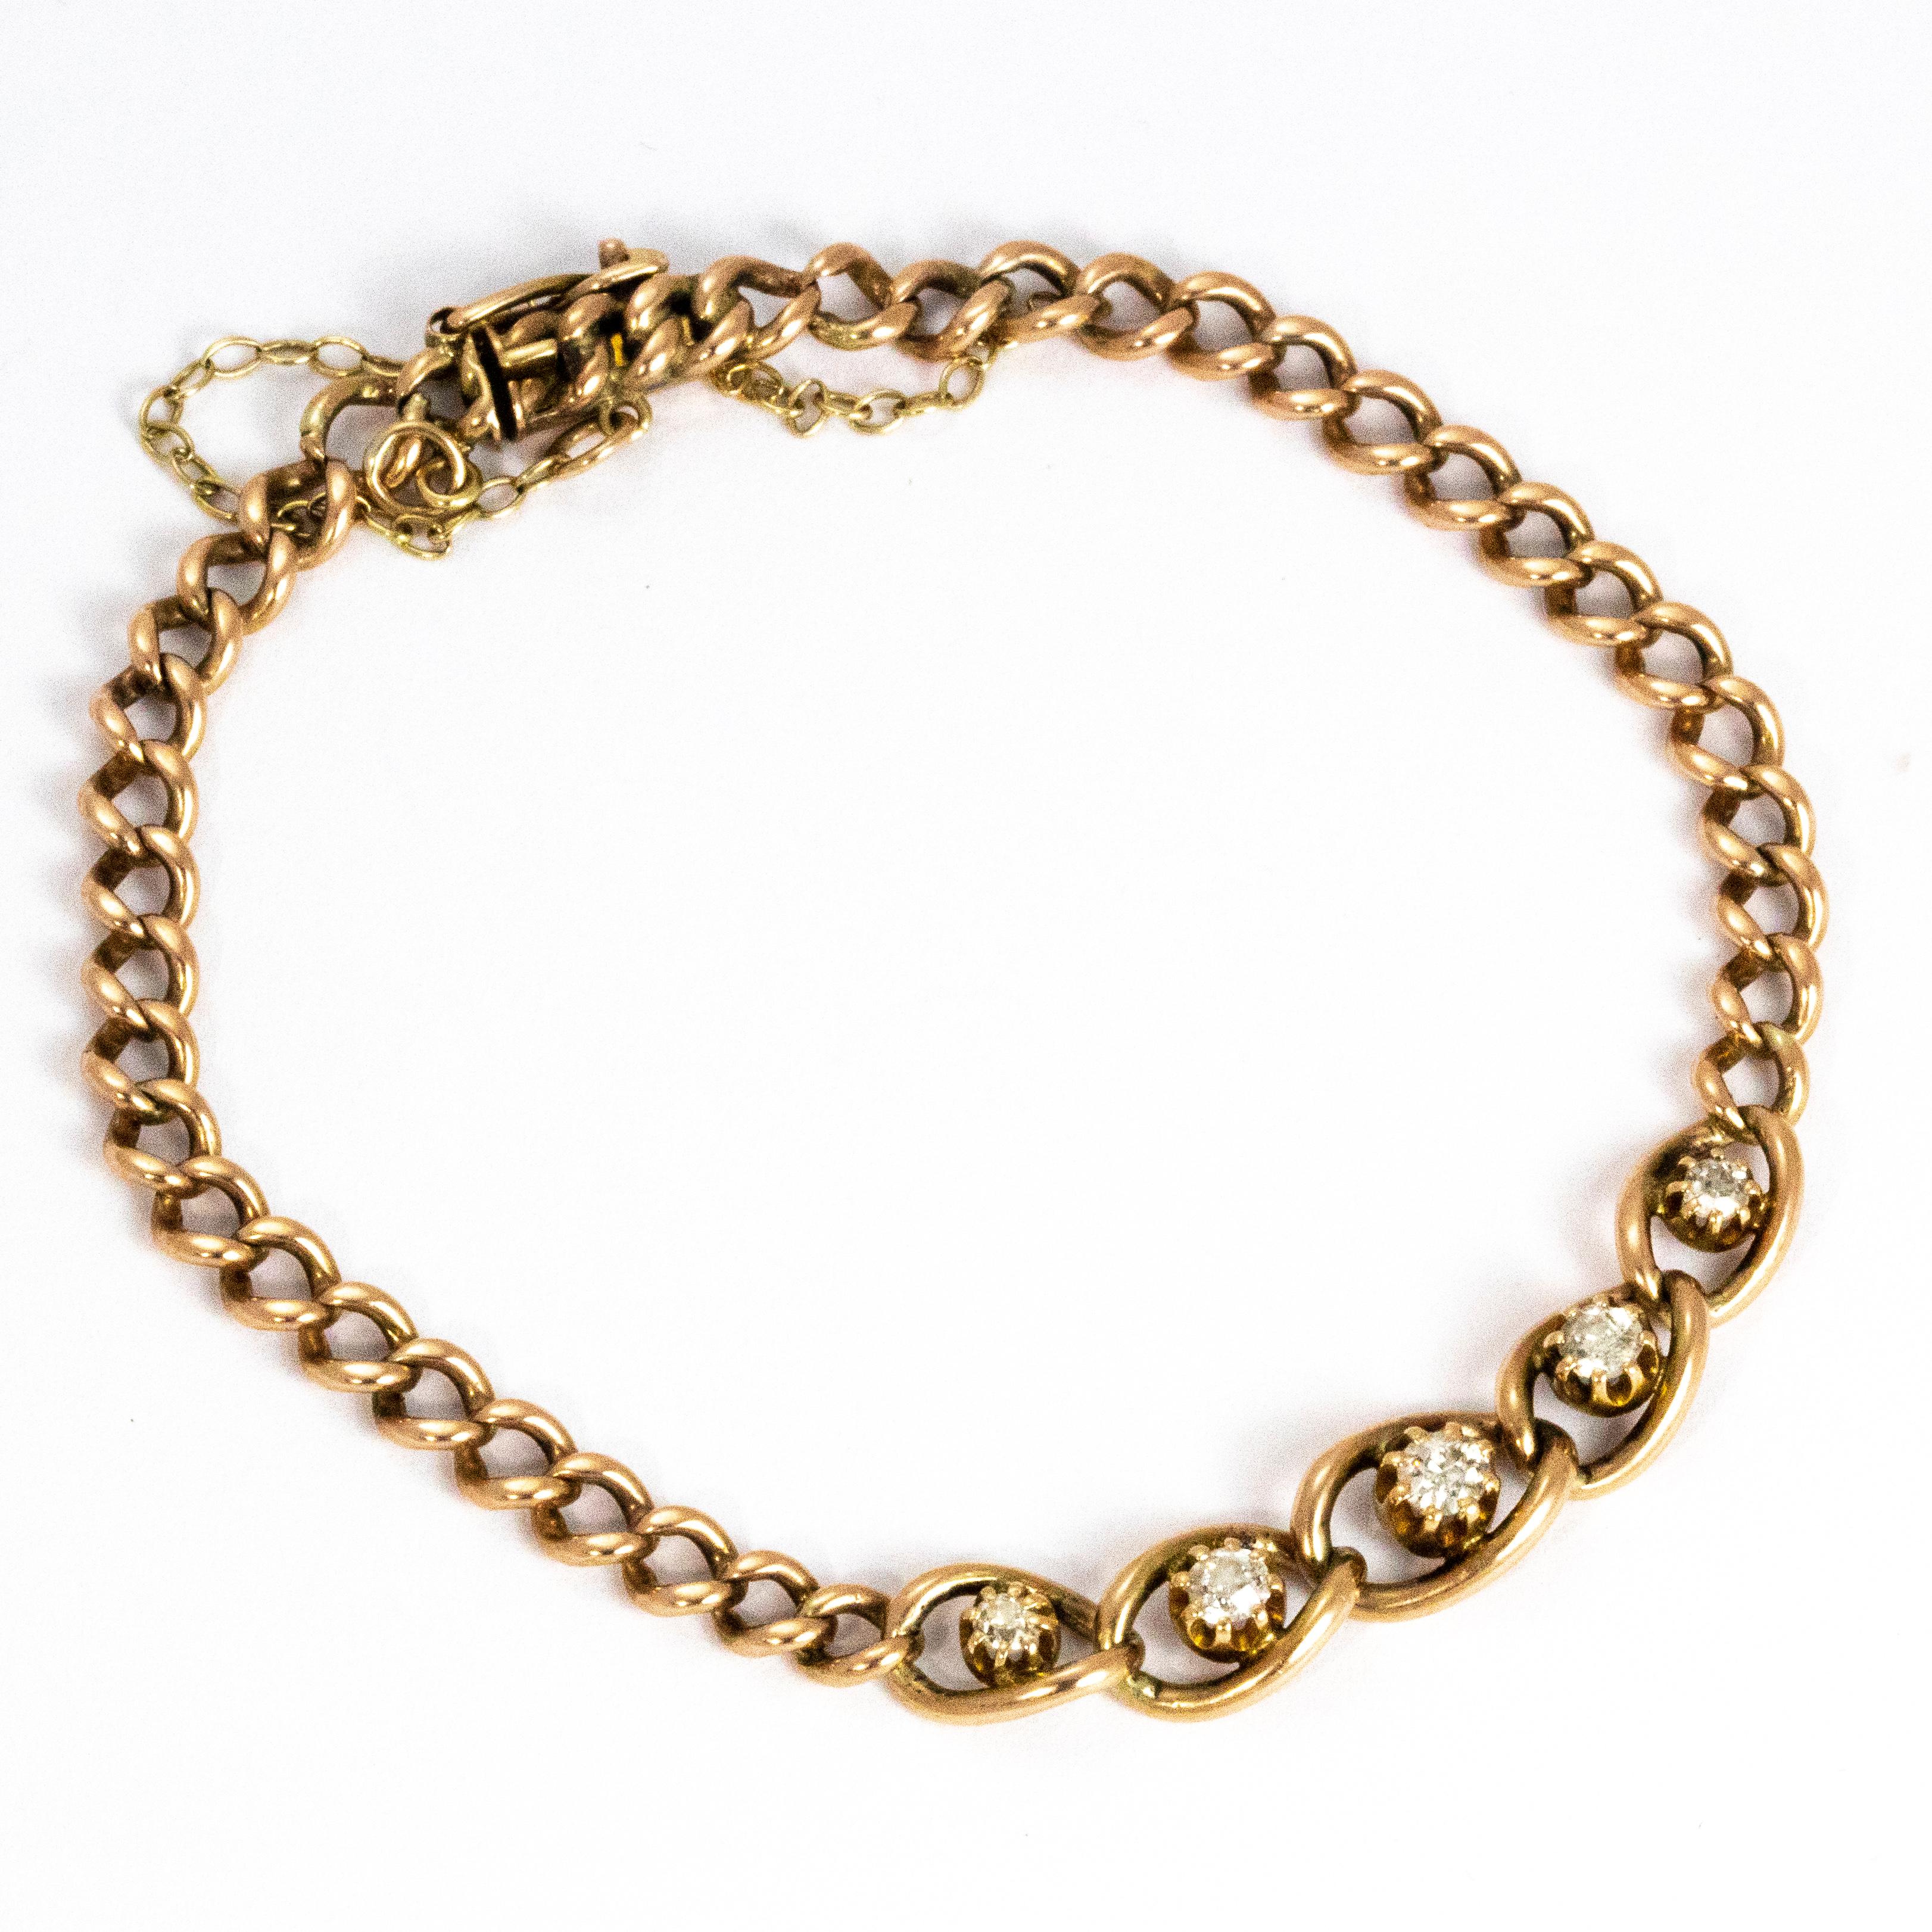 This delicately beautiful Edwardian bracelet holds five sparkling diamonds encased in larger links. The bracelet is made up of a 9ct curb link chain.

Length: 7inches 